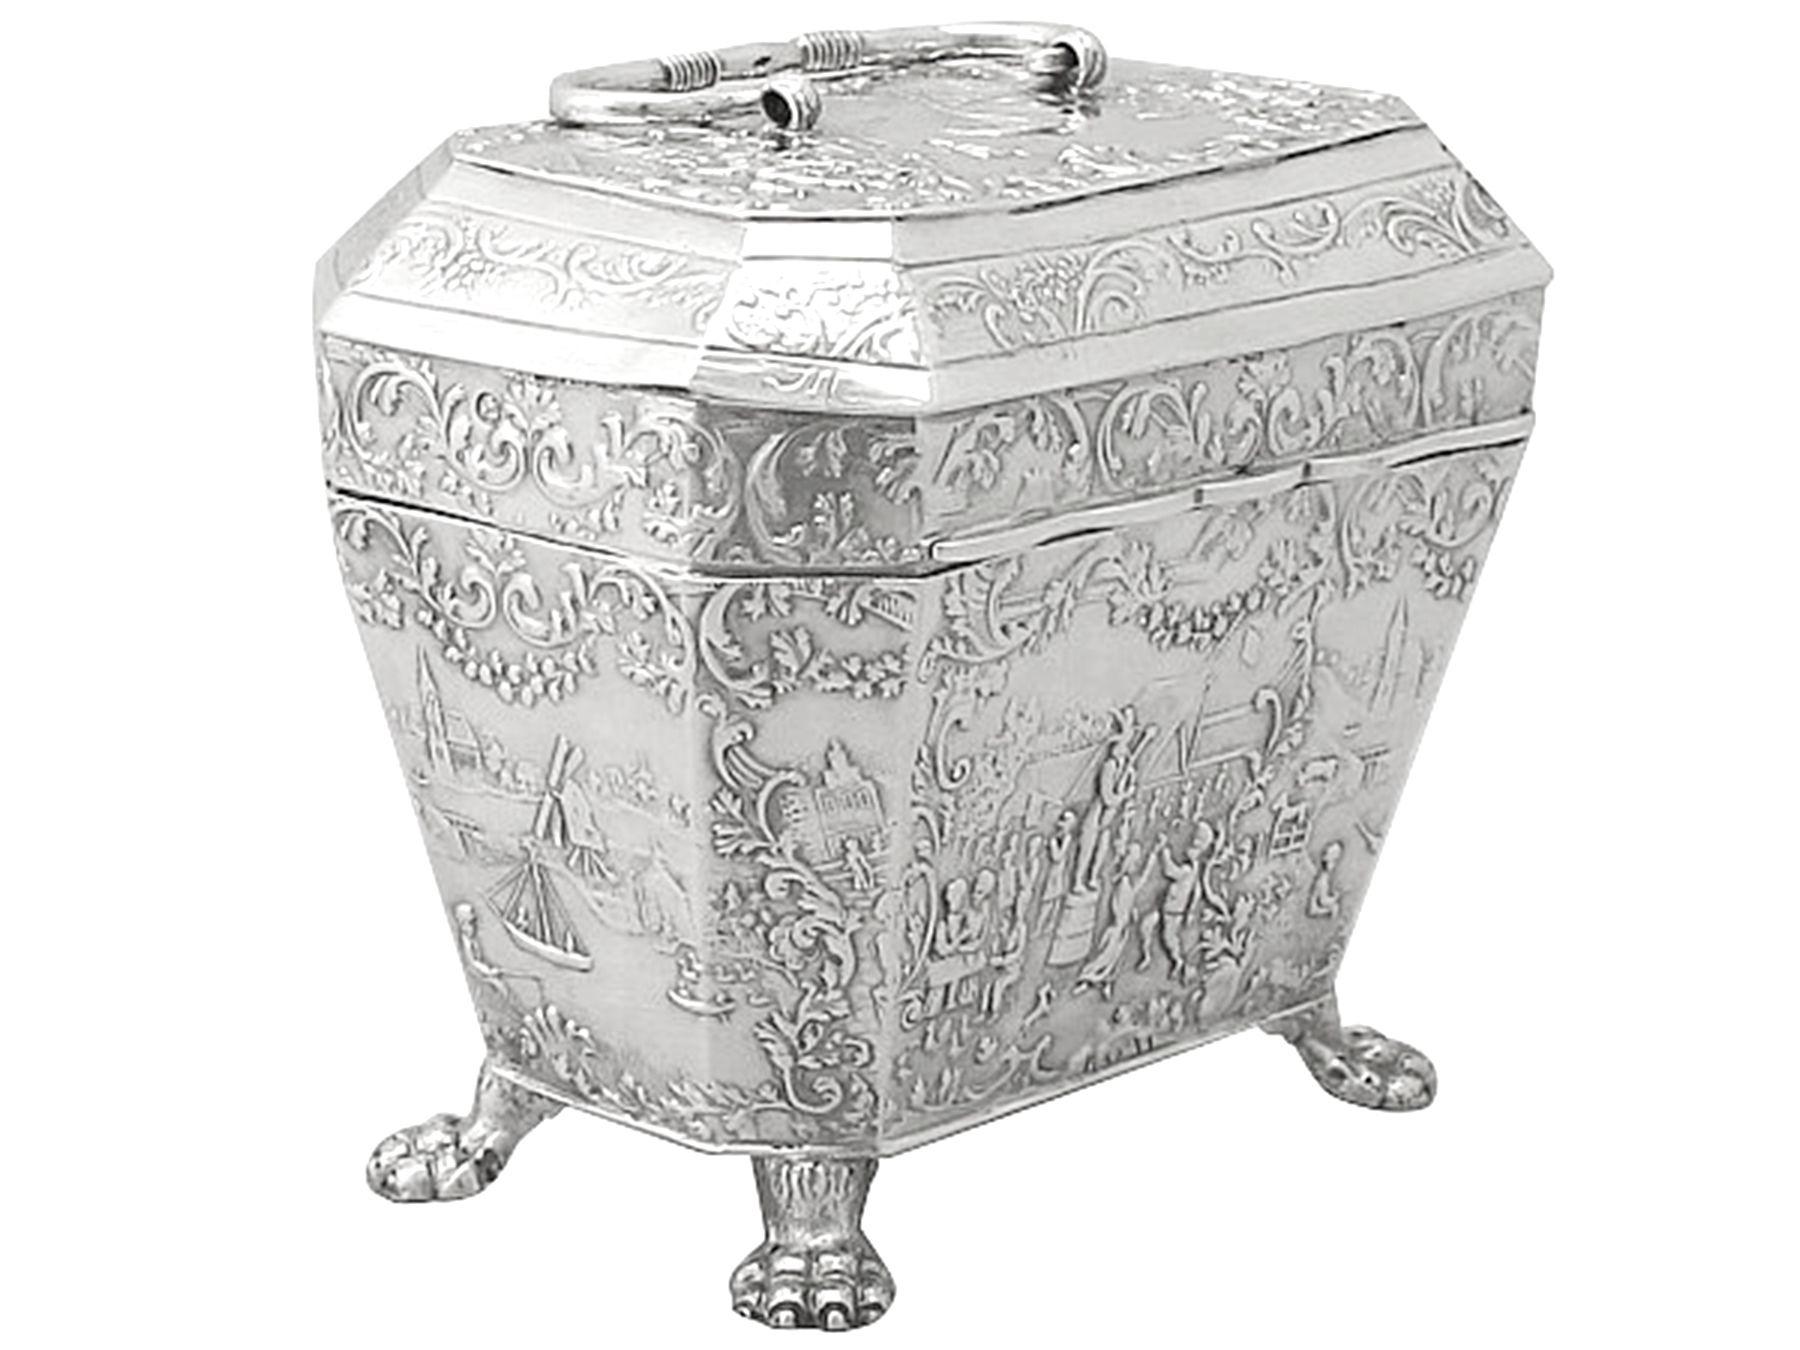 An exceptional, fine and impressive antique Dutch silver tea caddy; an addition to our silver teaware collection

This exceptional Dutch silver tea caddy has been realistically modelled in the form of a classic antique wine cooler and has a